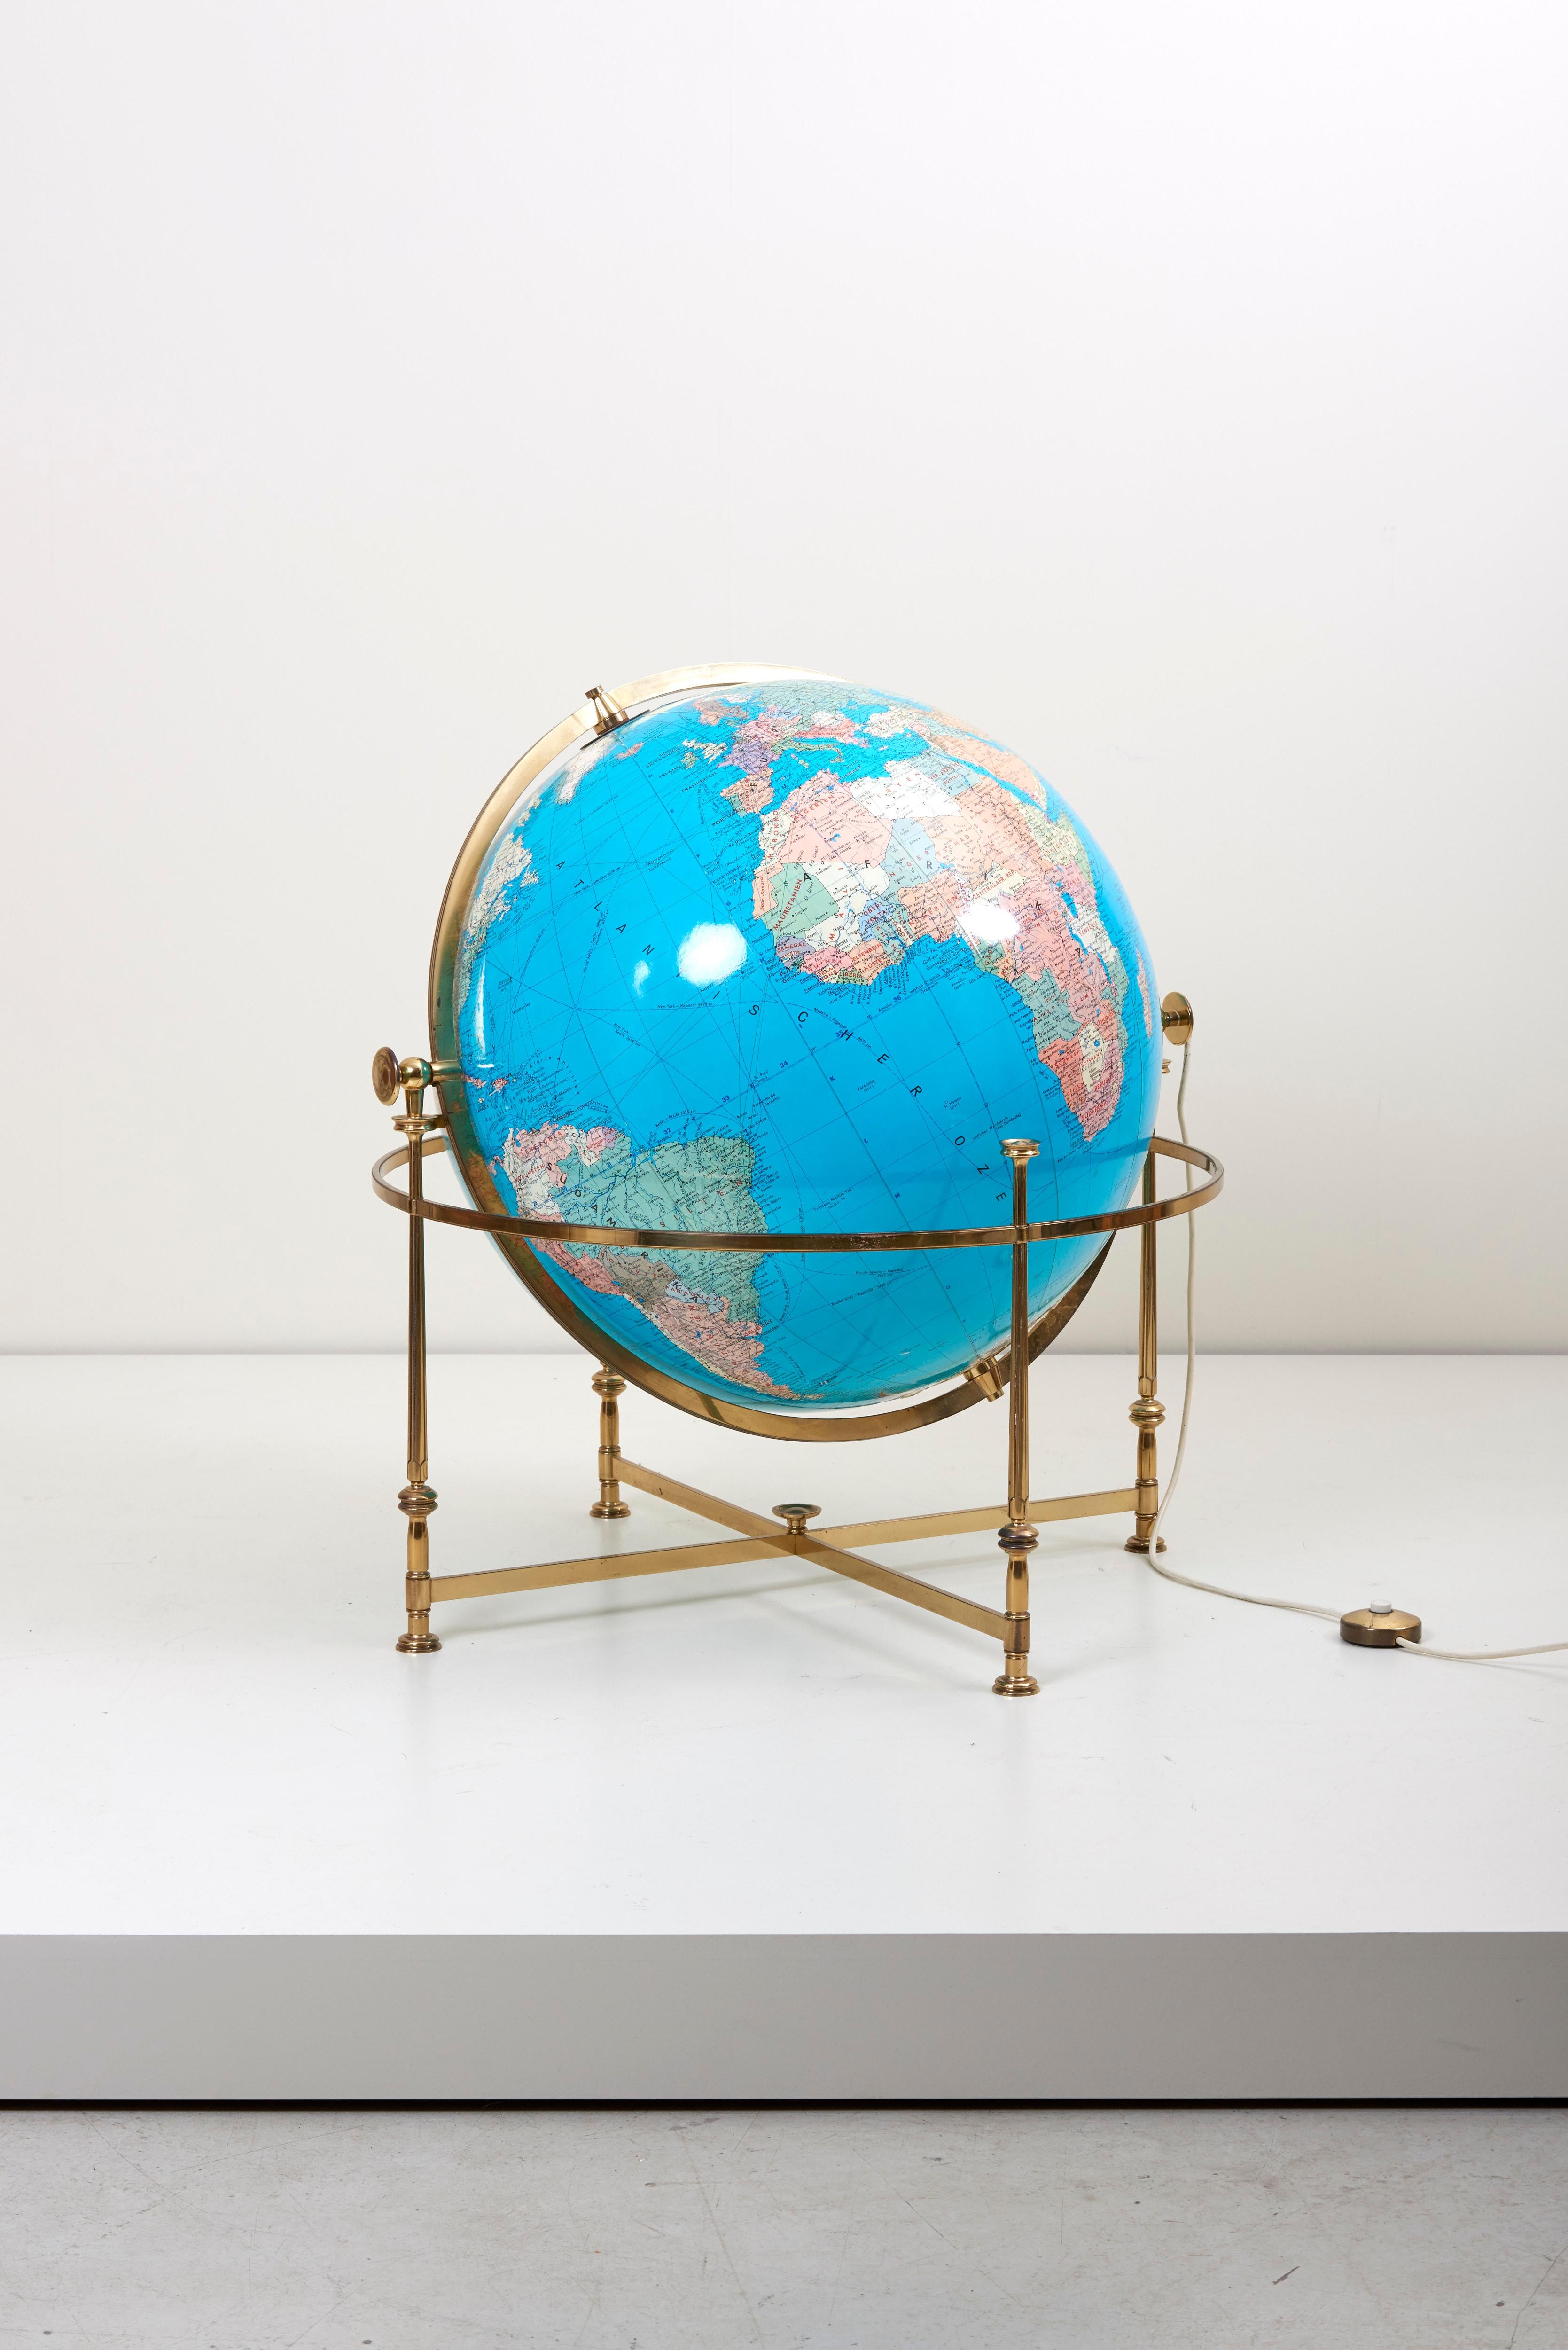 Wonderful and rare illuminated globe with a brass stand. The globe is rotating and adjustable in high.